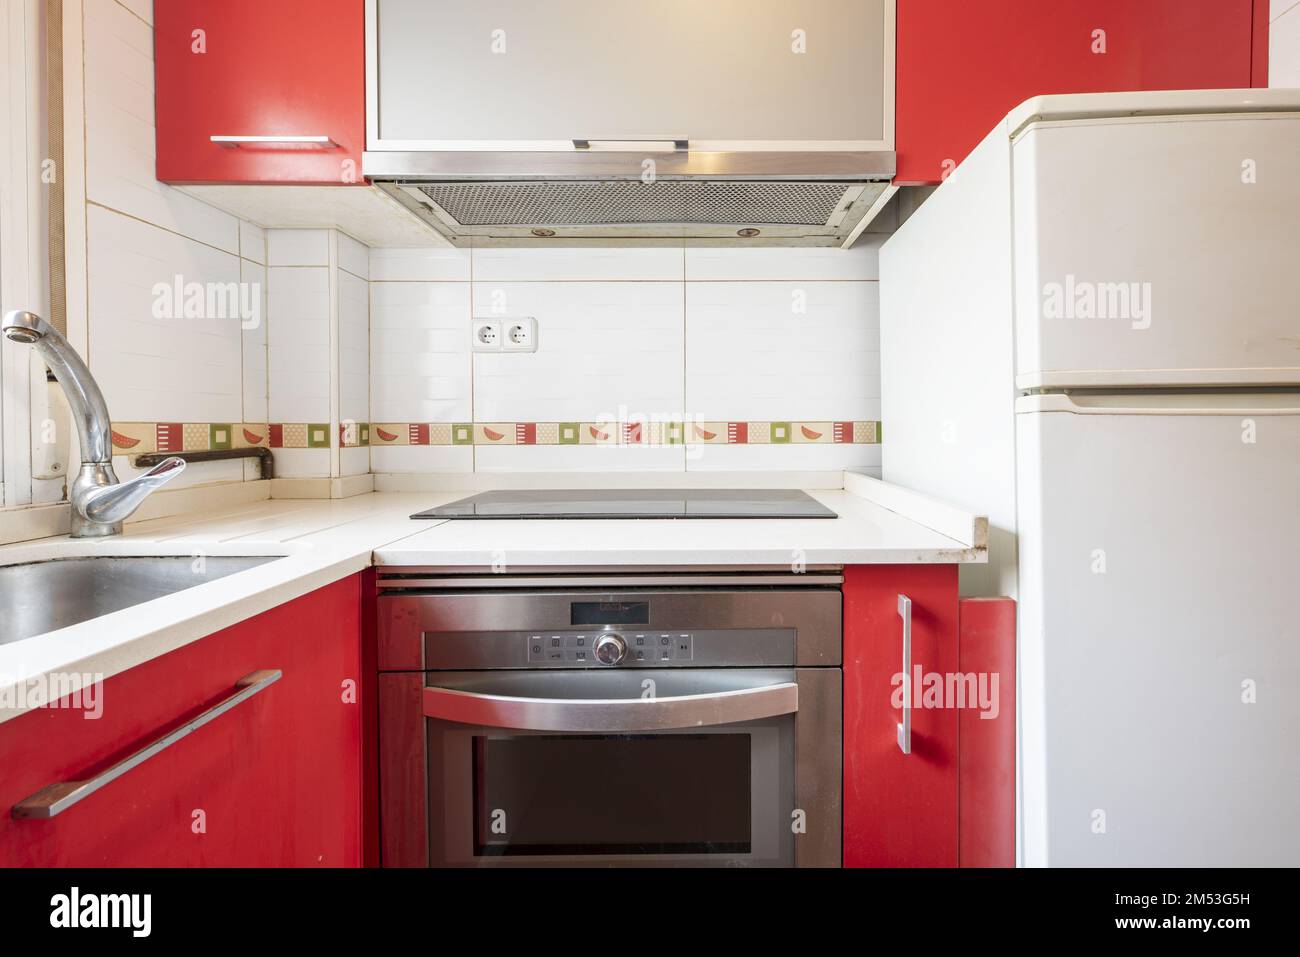 Used kitchen with red and white cabinets, matching stainless steel oven with sink Stock Photo